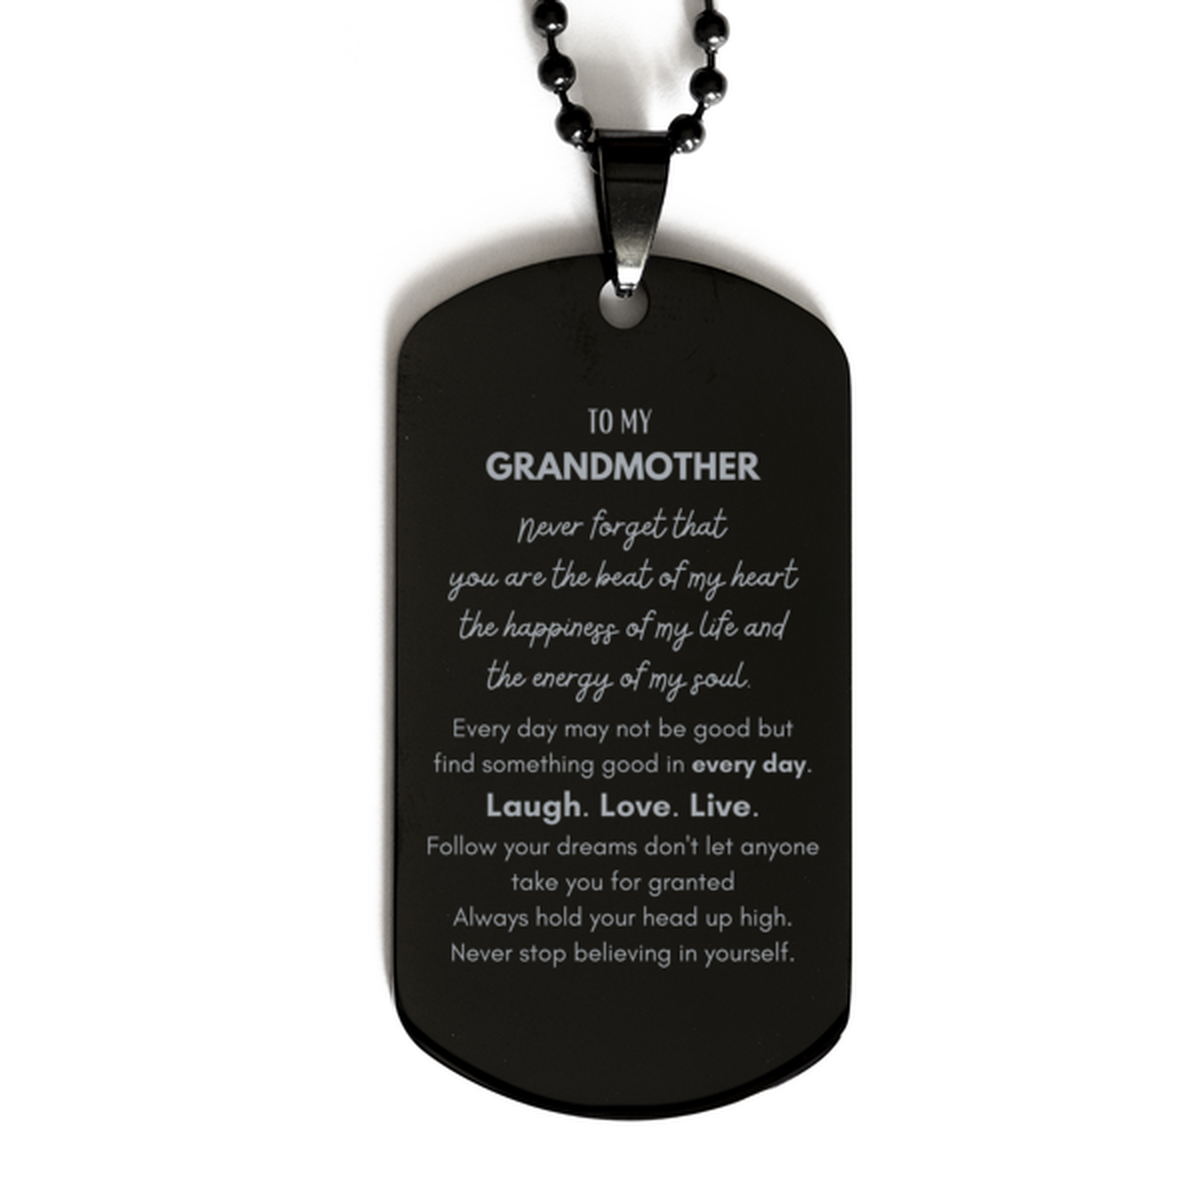 To My Grandmother Dogtag Gifts, Christmas Grandmother Black Dog Tag Present, Birthday Unique Motivational For Grandmother, To My Grandmother Never forget that you are the beat of my heart the happiness of my life and the energy of my soul